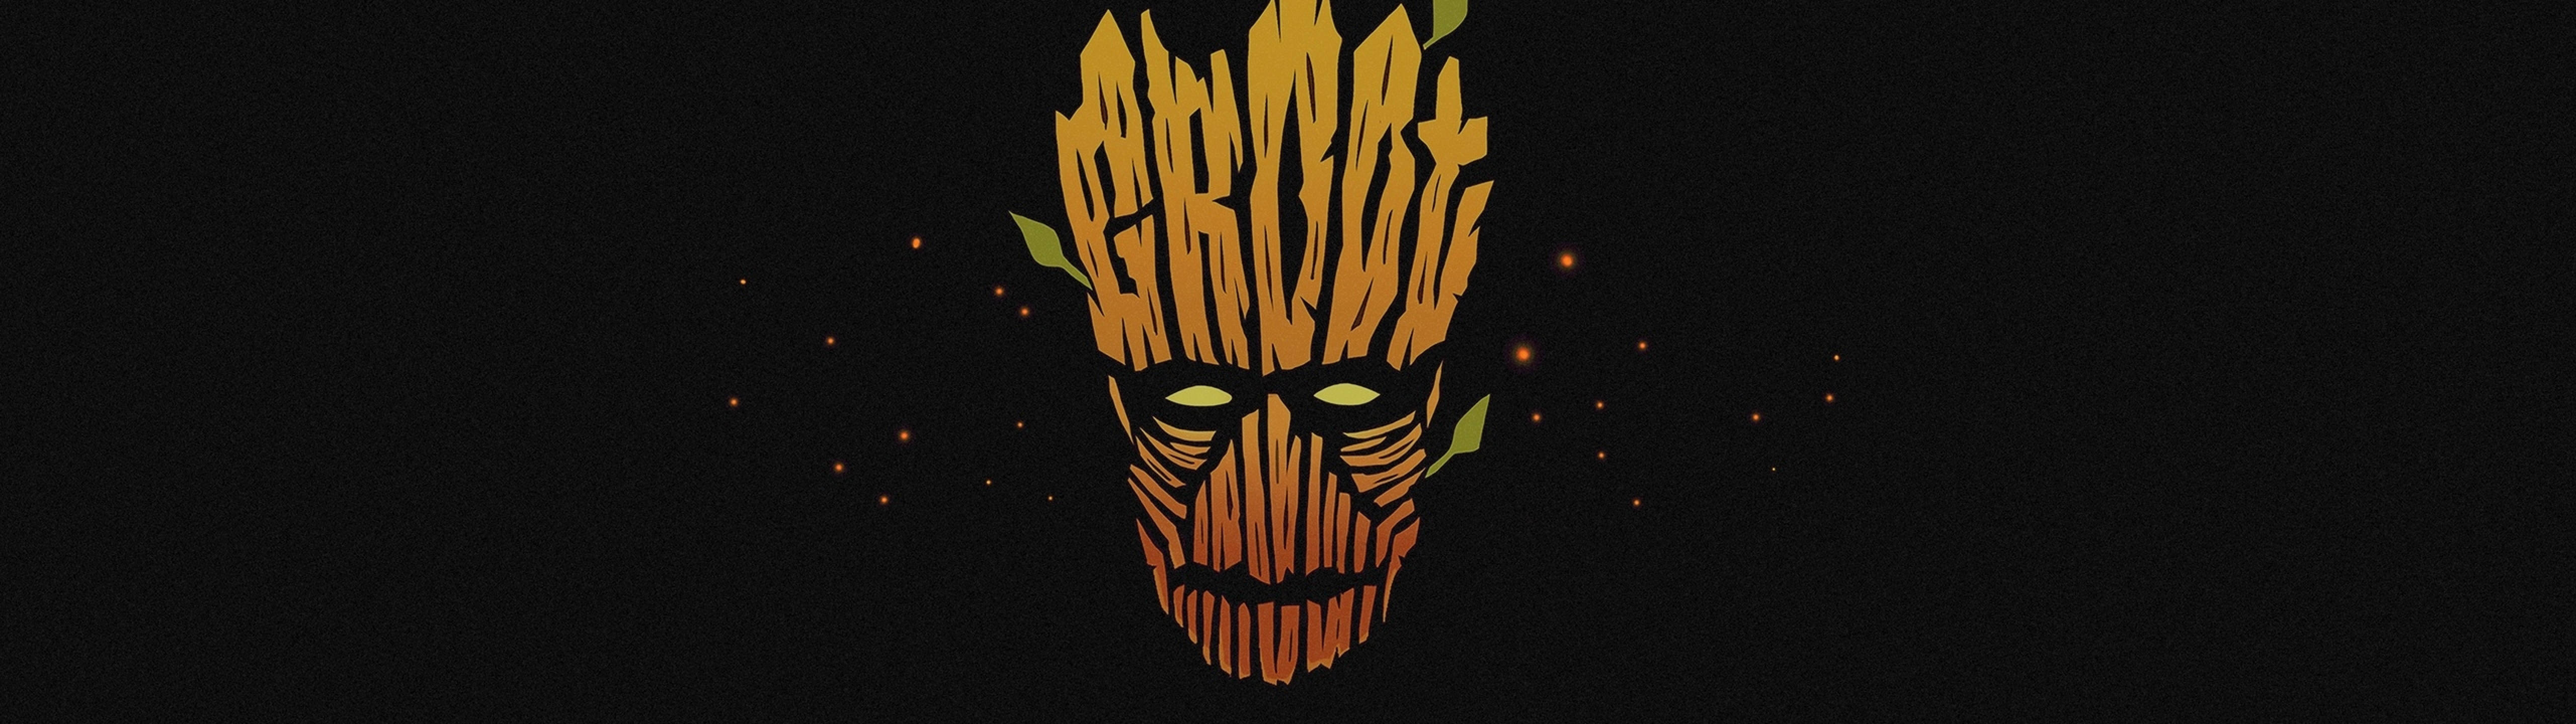 Groot Guardian Of The Galaxy Marvel 5120 X 1440 Wallpaper